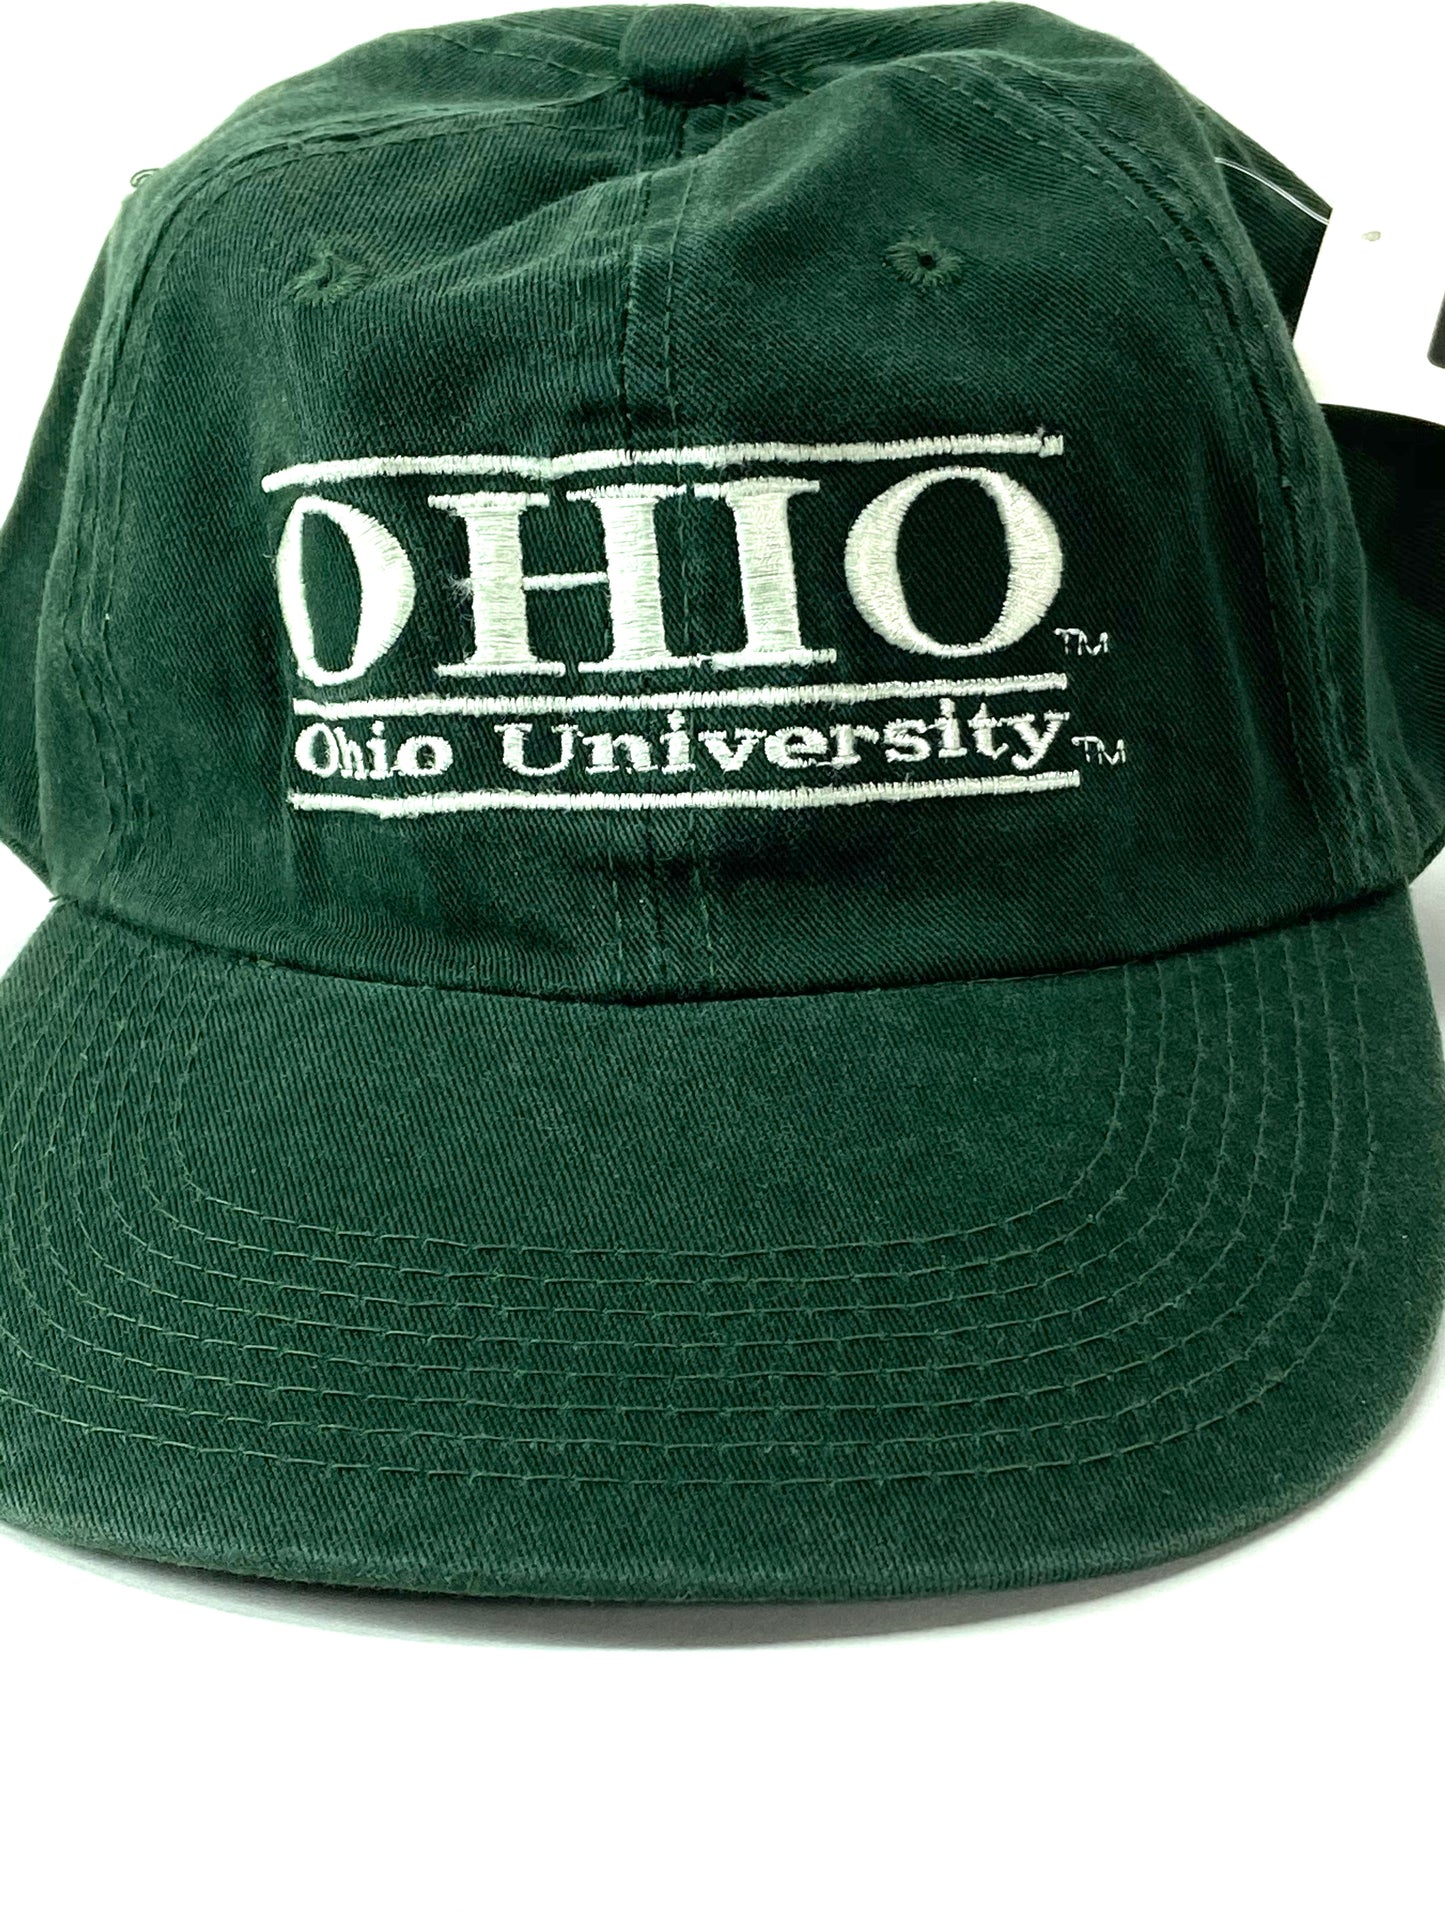 Ohio University Bobcats Vintage NCAA Fitted Unstructured Hat by The Game